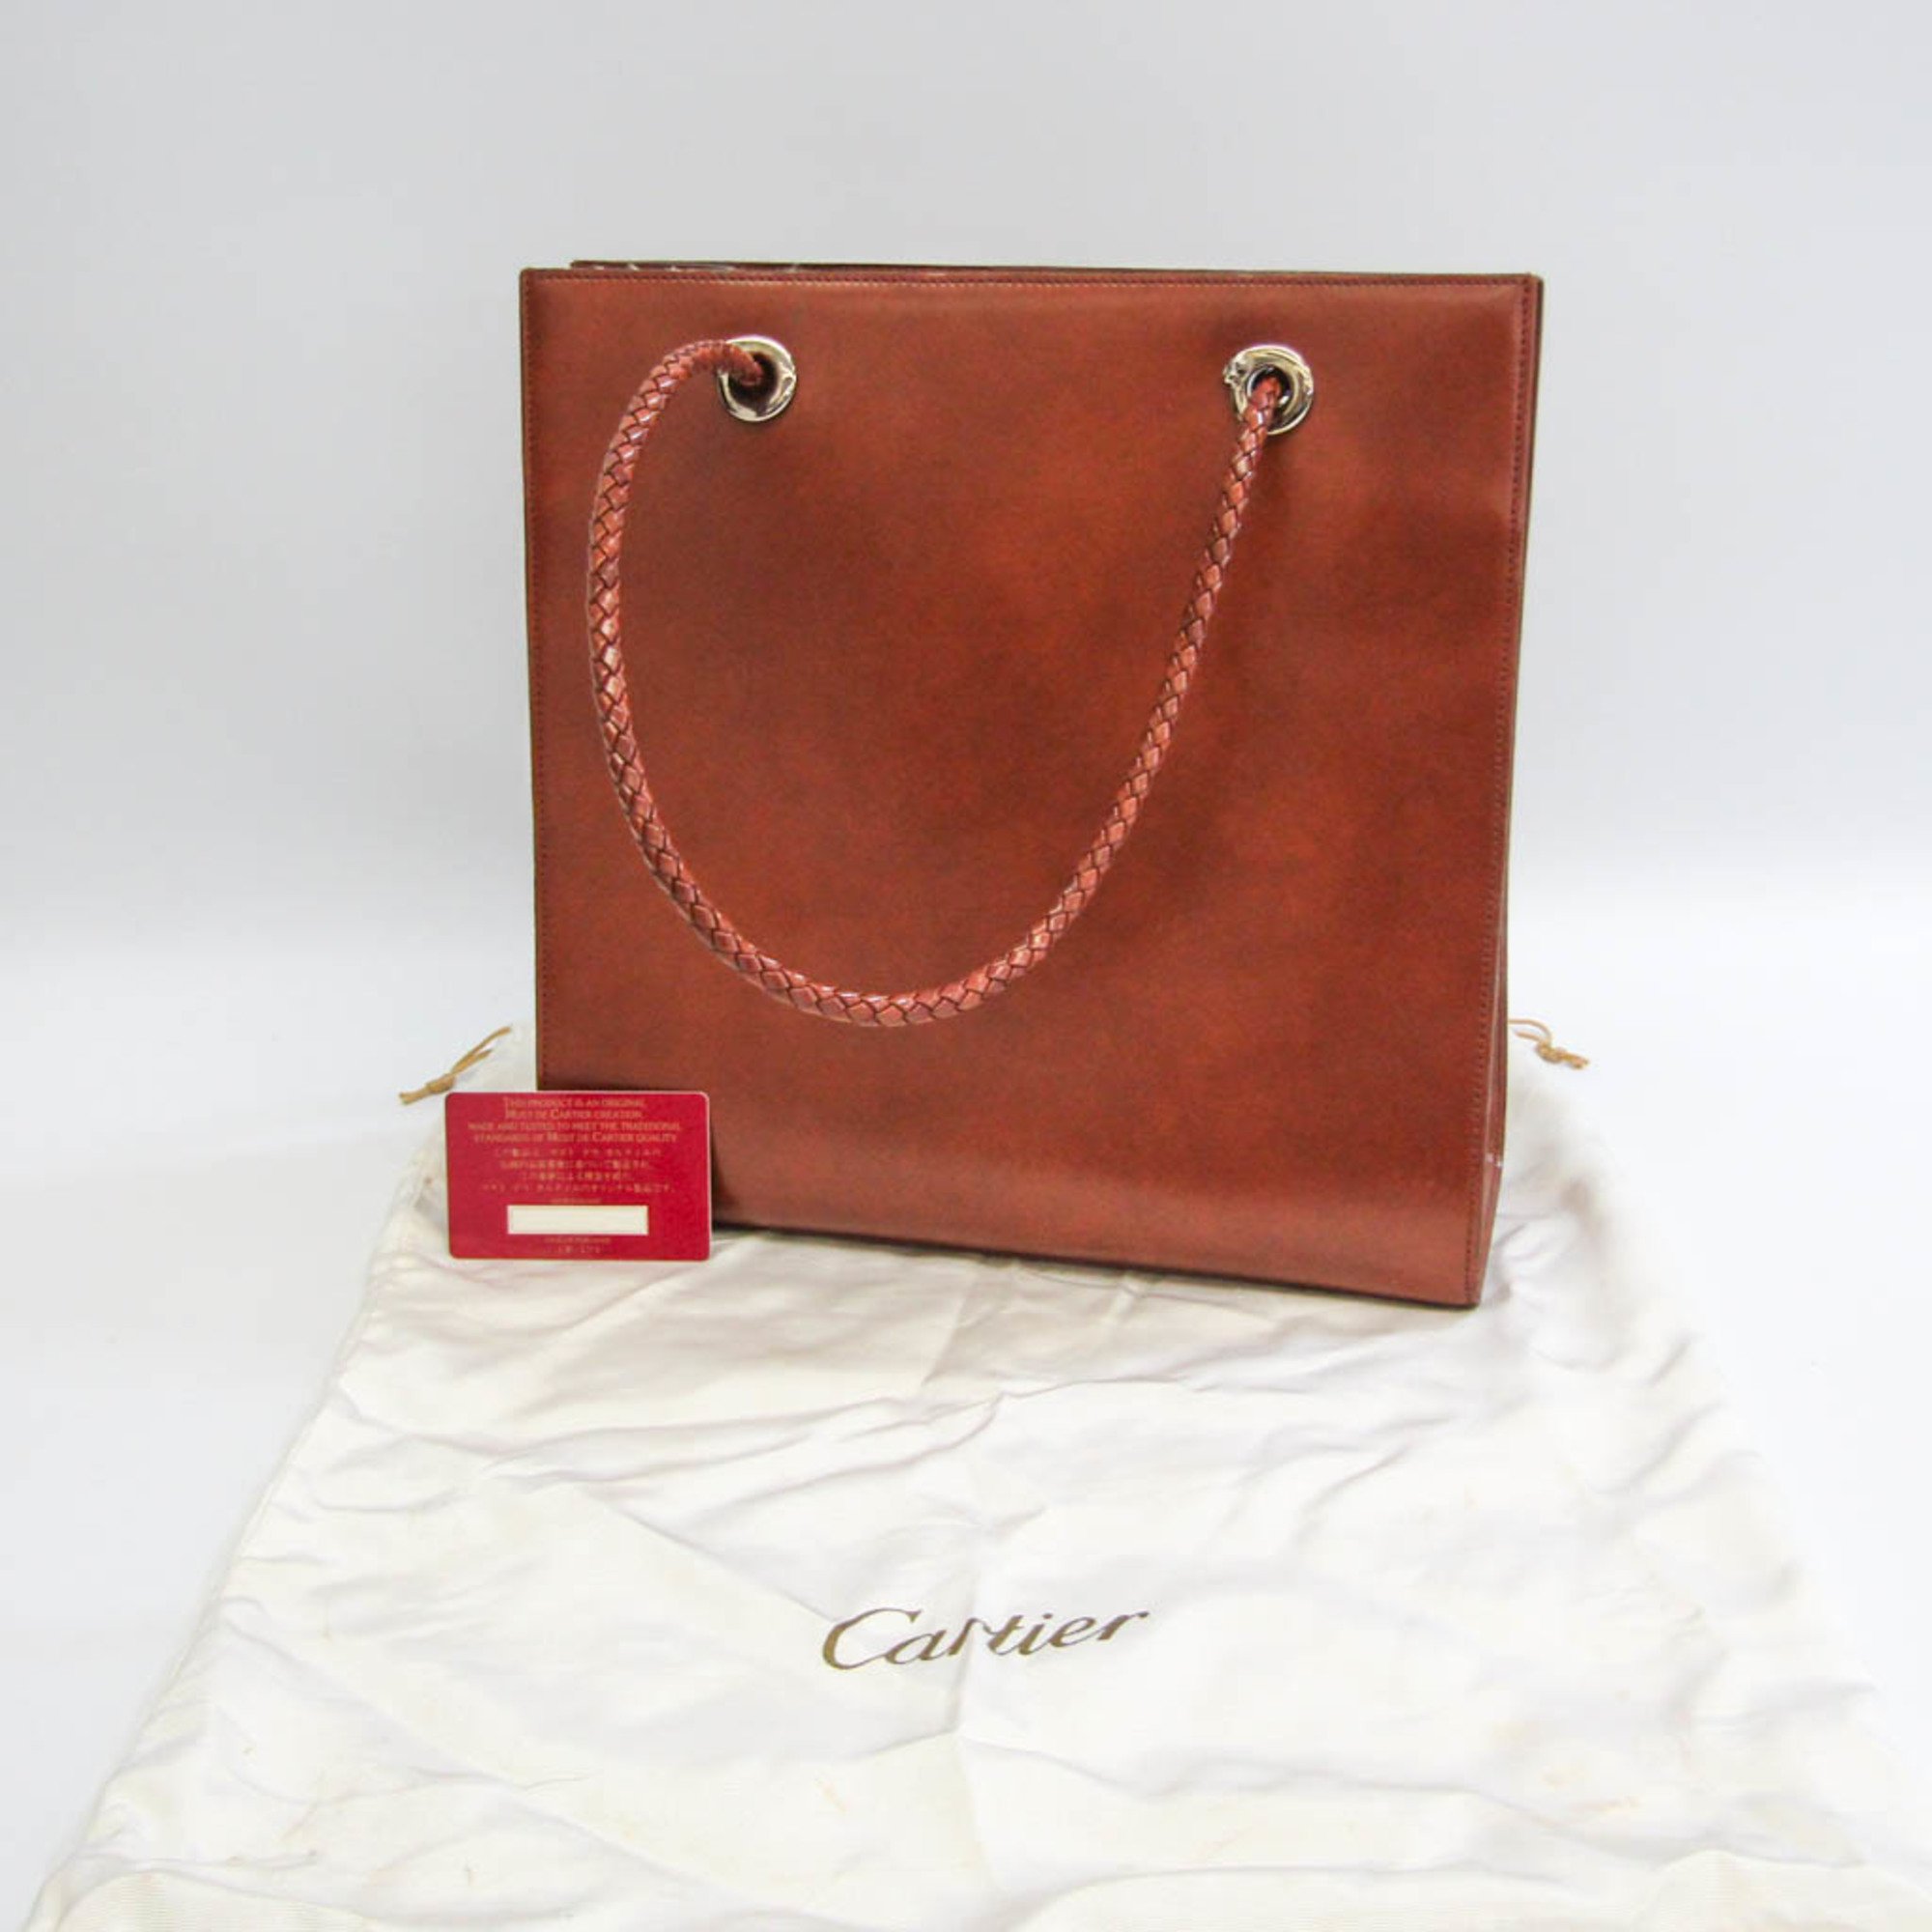 Cartier Women's Leather Tote Bag Brown